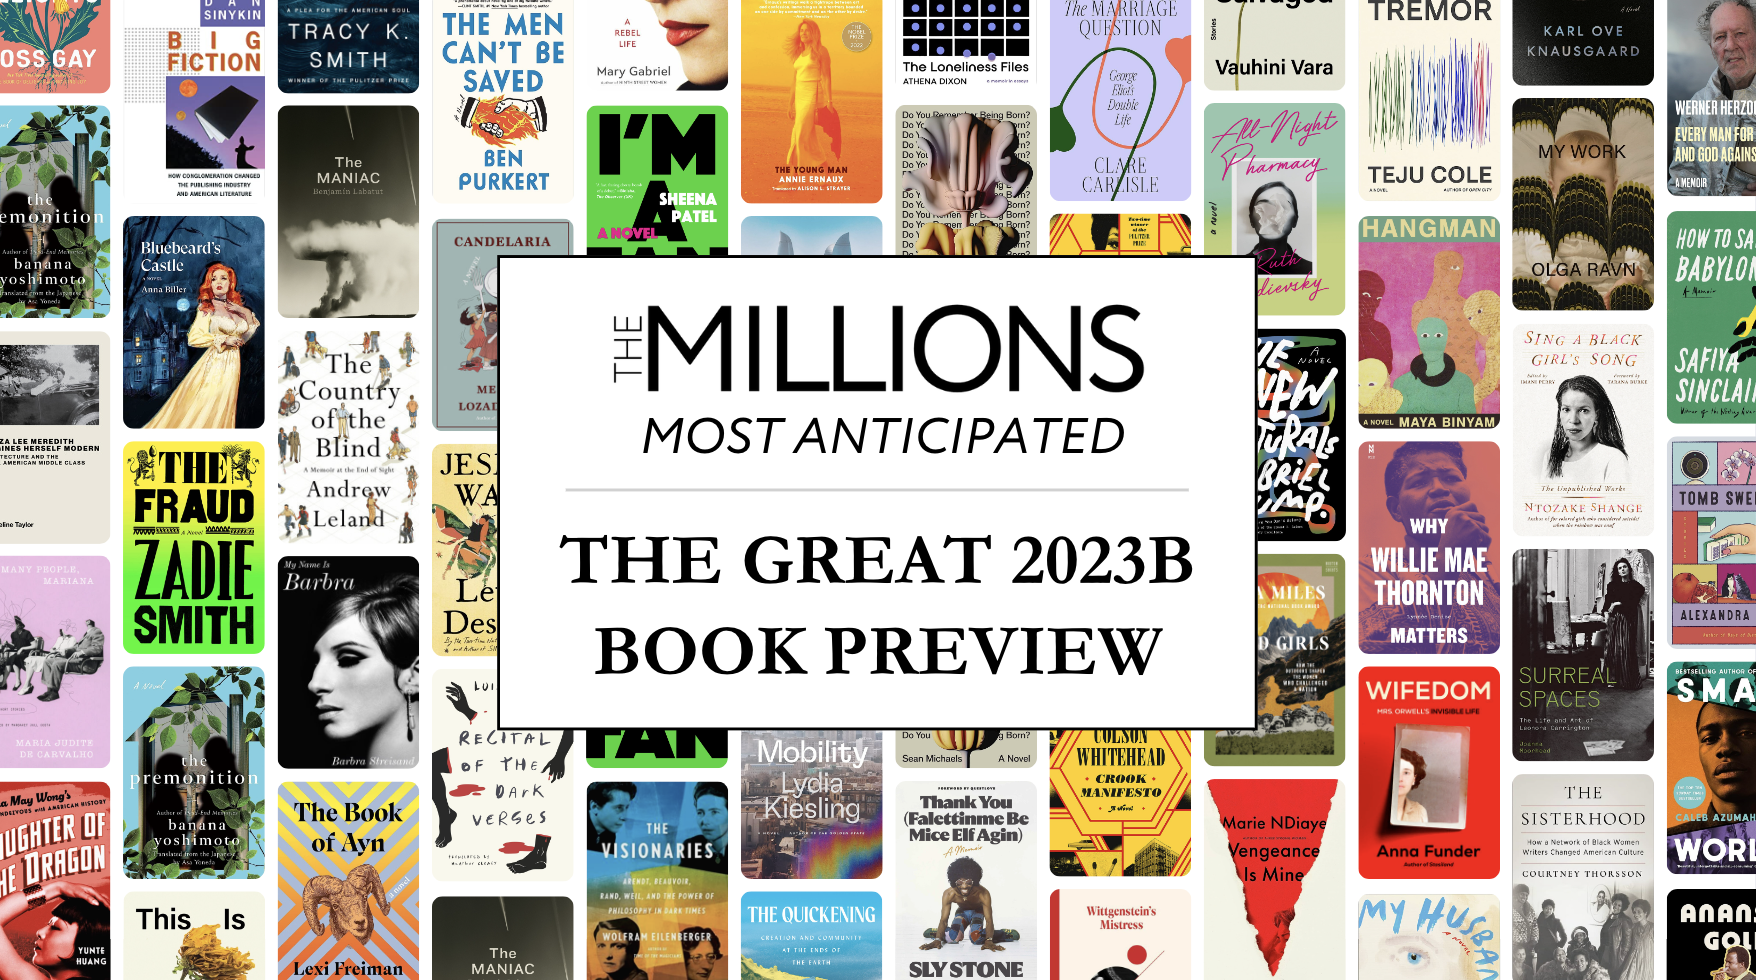 Most Anticipated: The Great 2023B Book Preview - The Millions